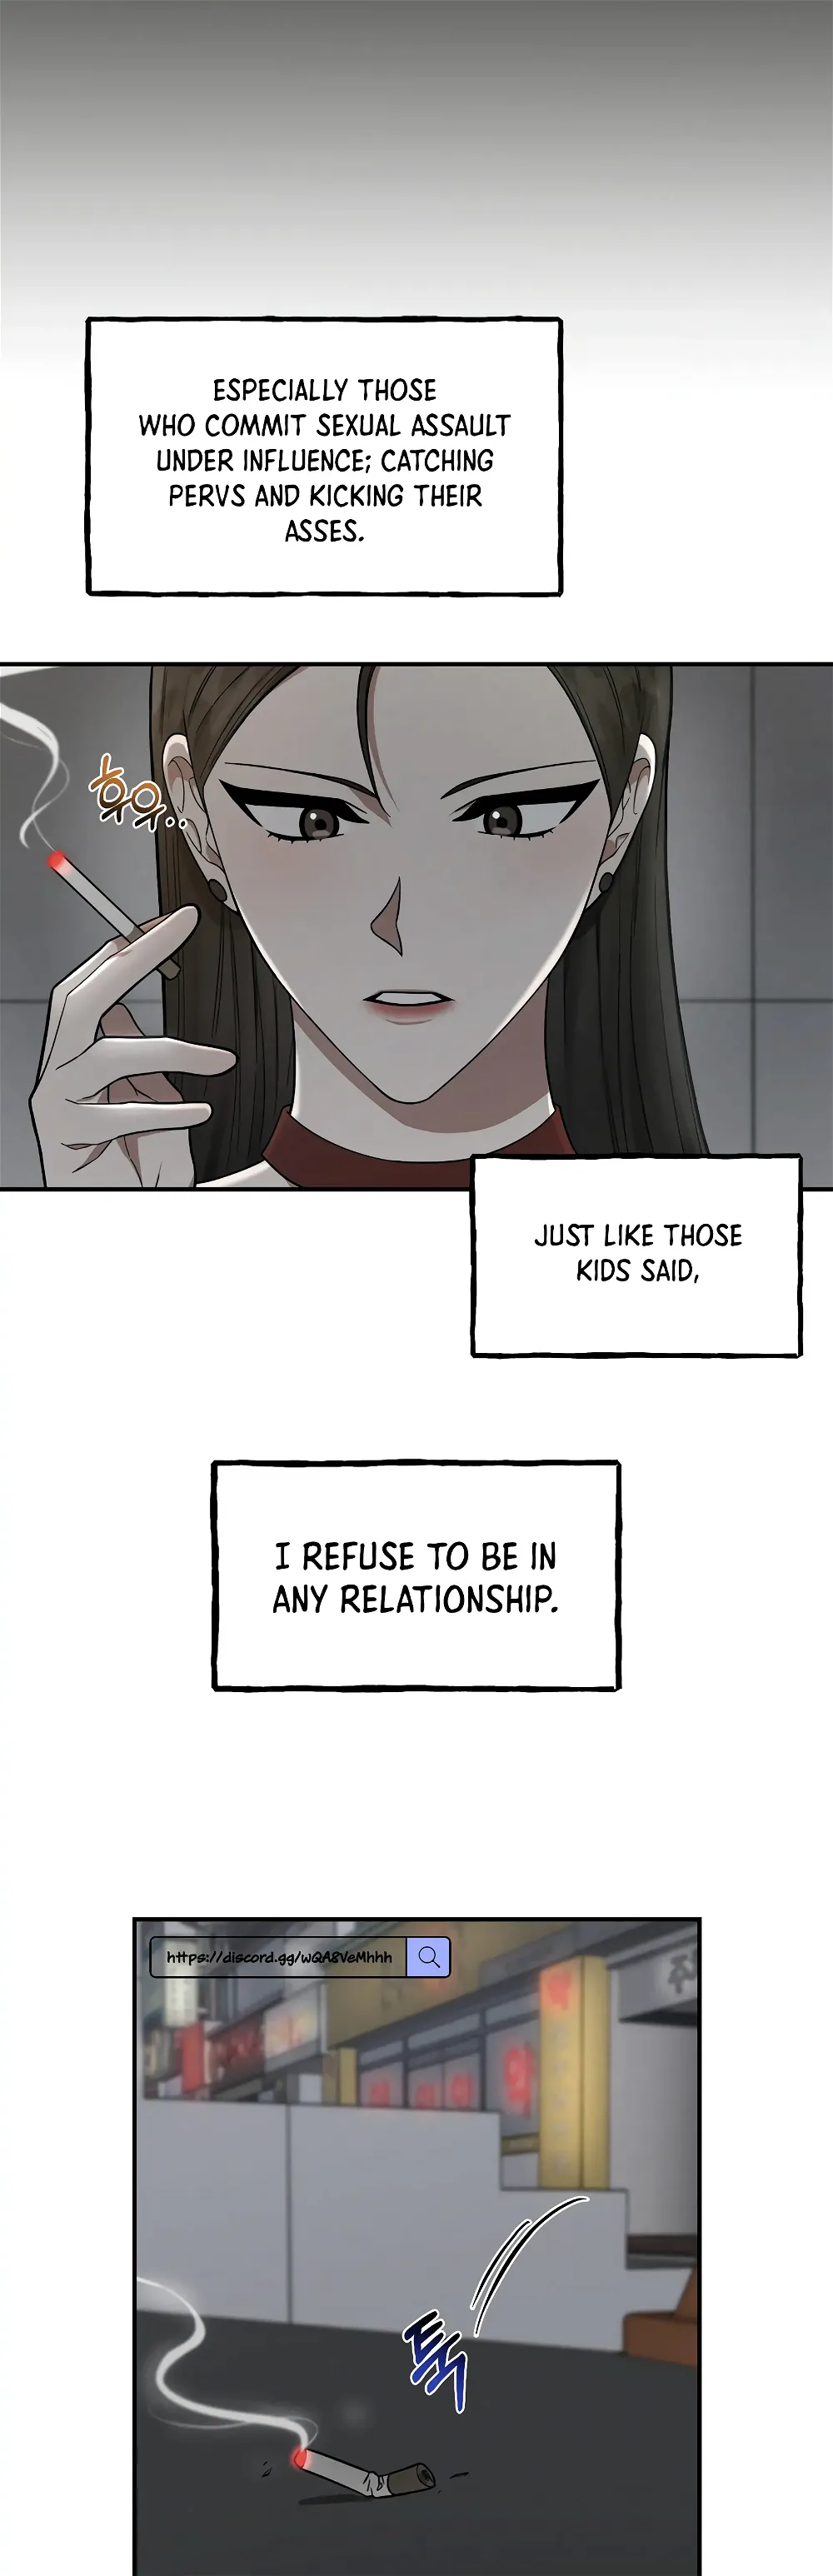 Mijeong’s Relationships chapter 2 - Page 33